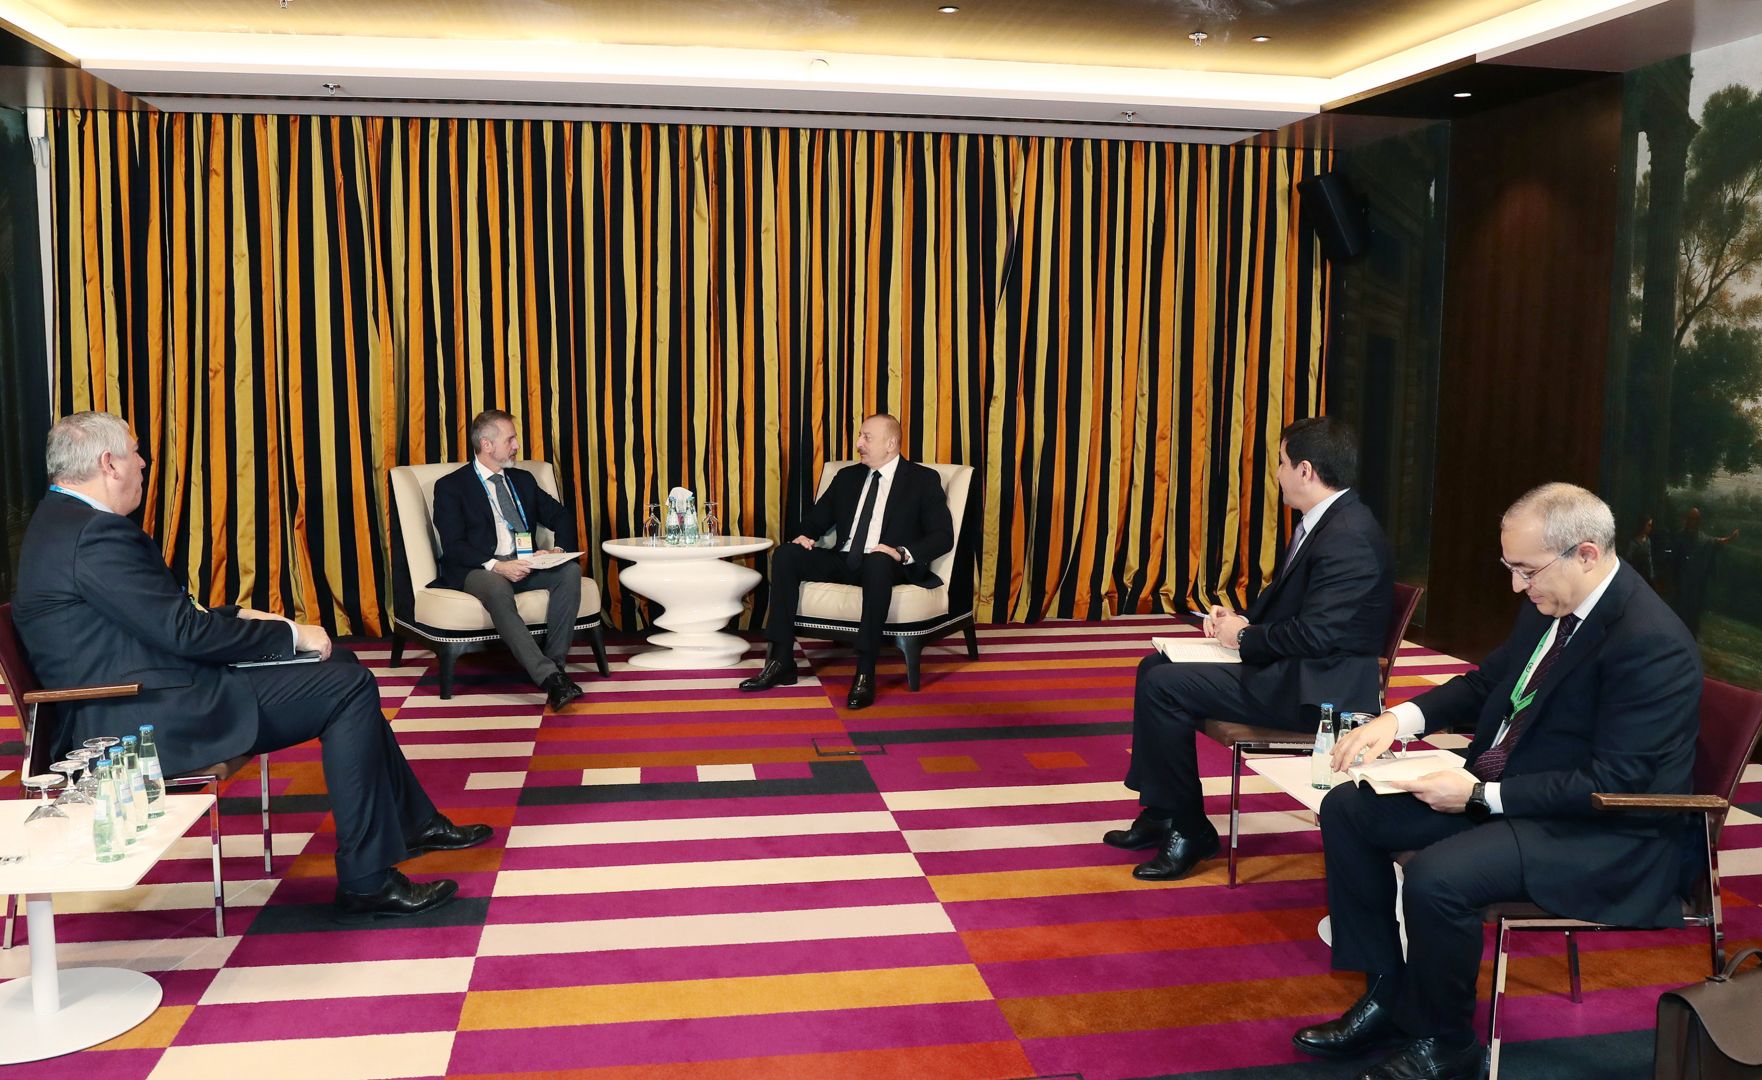 Azerbaijani President and President of Indra Company meet in Munich [PHOTOS\VIDEO]